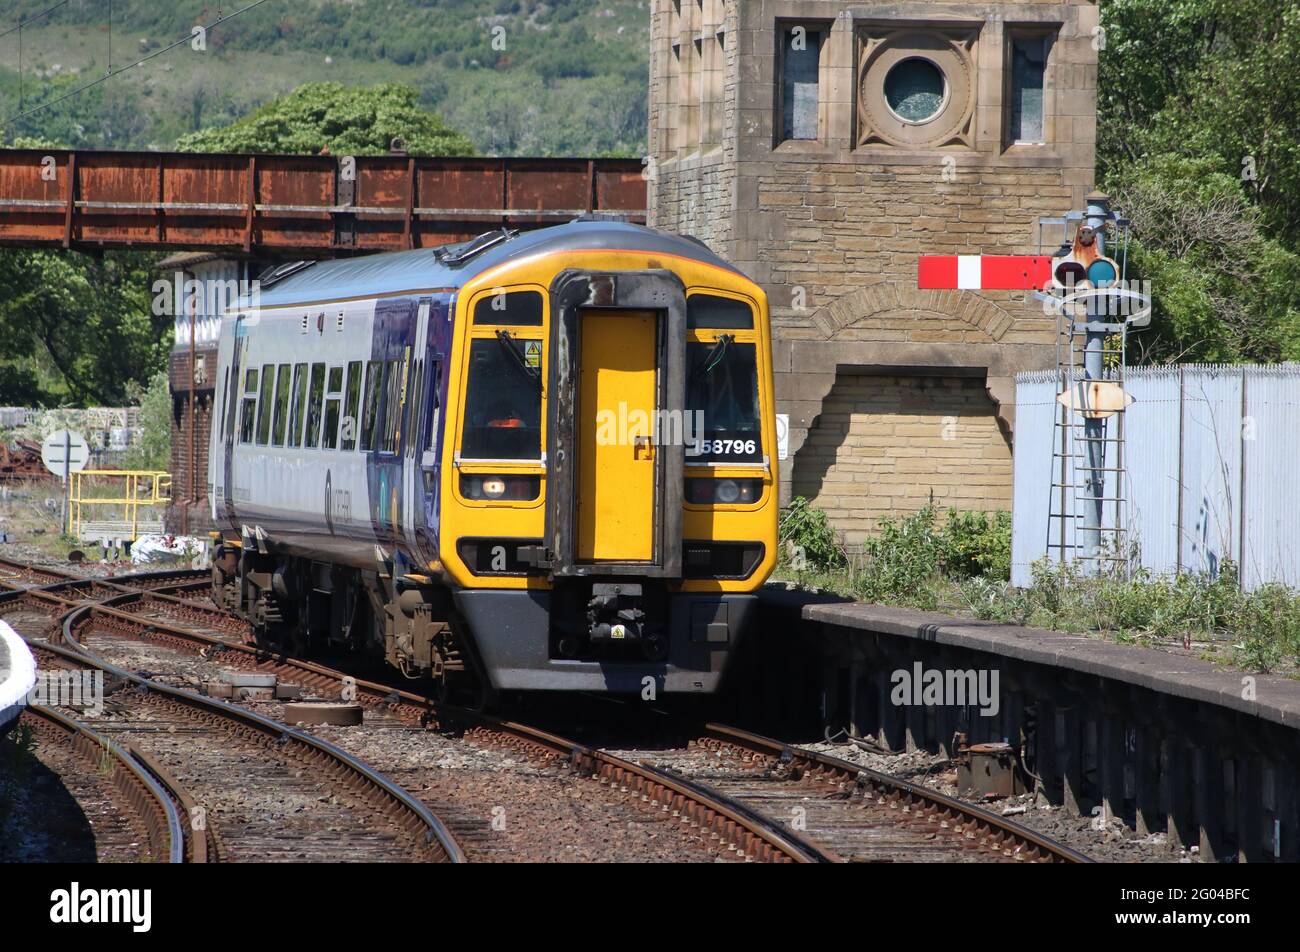 Class 158 two car express sprinter dmu, unit number 158 796, in Northern livery arriving at Carnforth station platform 1 on Monday 31st May 2021. Stock Photo